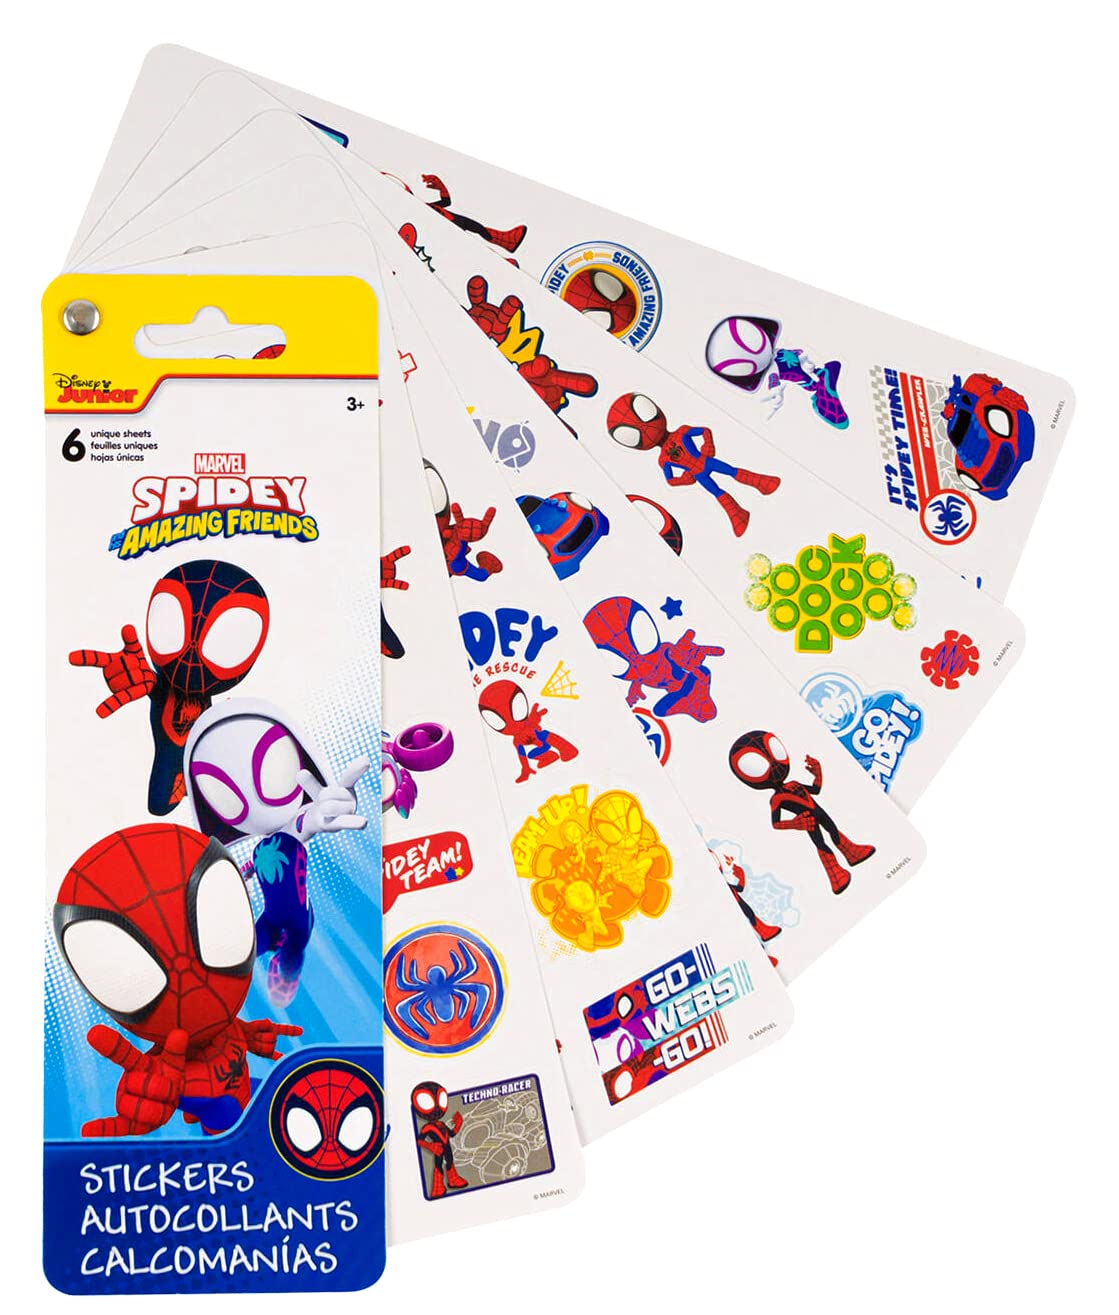 Bundle of 3 Imagine Ink Magic Pictures Coloring Activity Books Set for Boys, Kids, Toddlers - Spidey Amazing Friends, Paw Patrol, and Disney Mickey Mouse